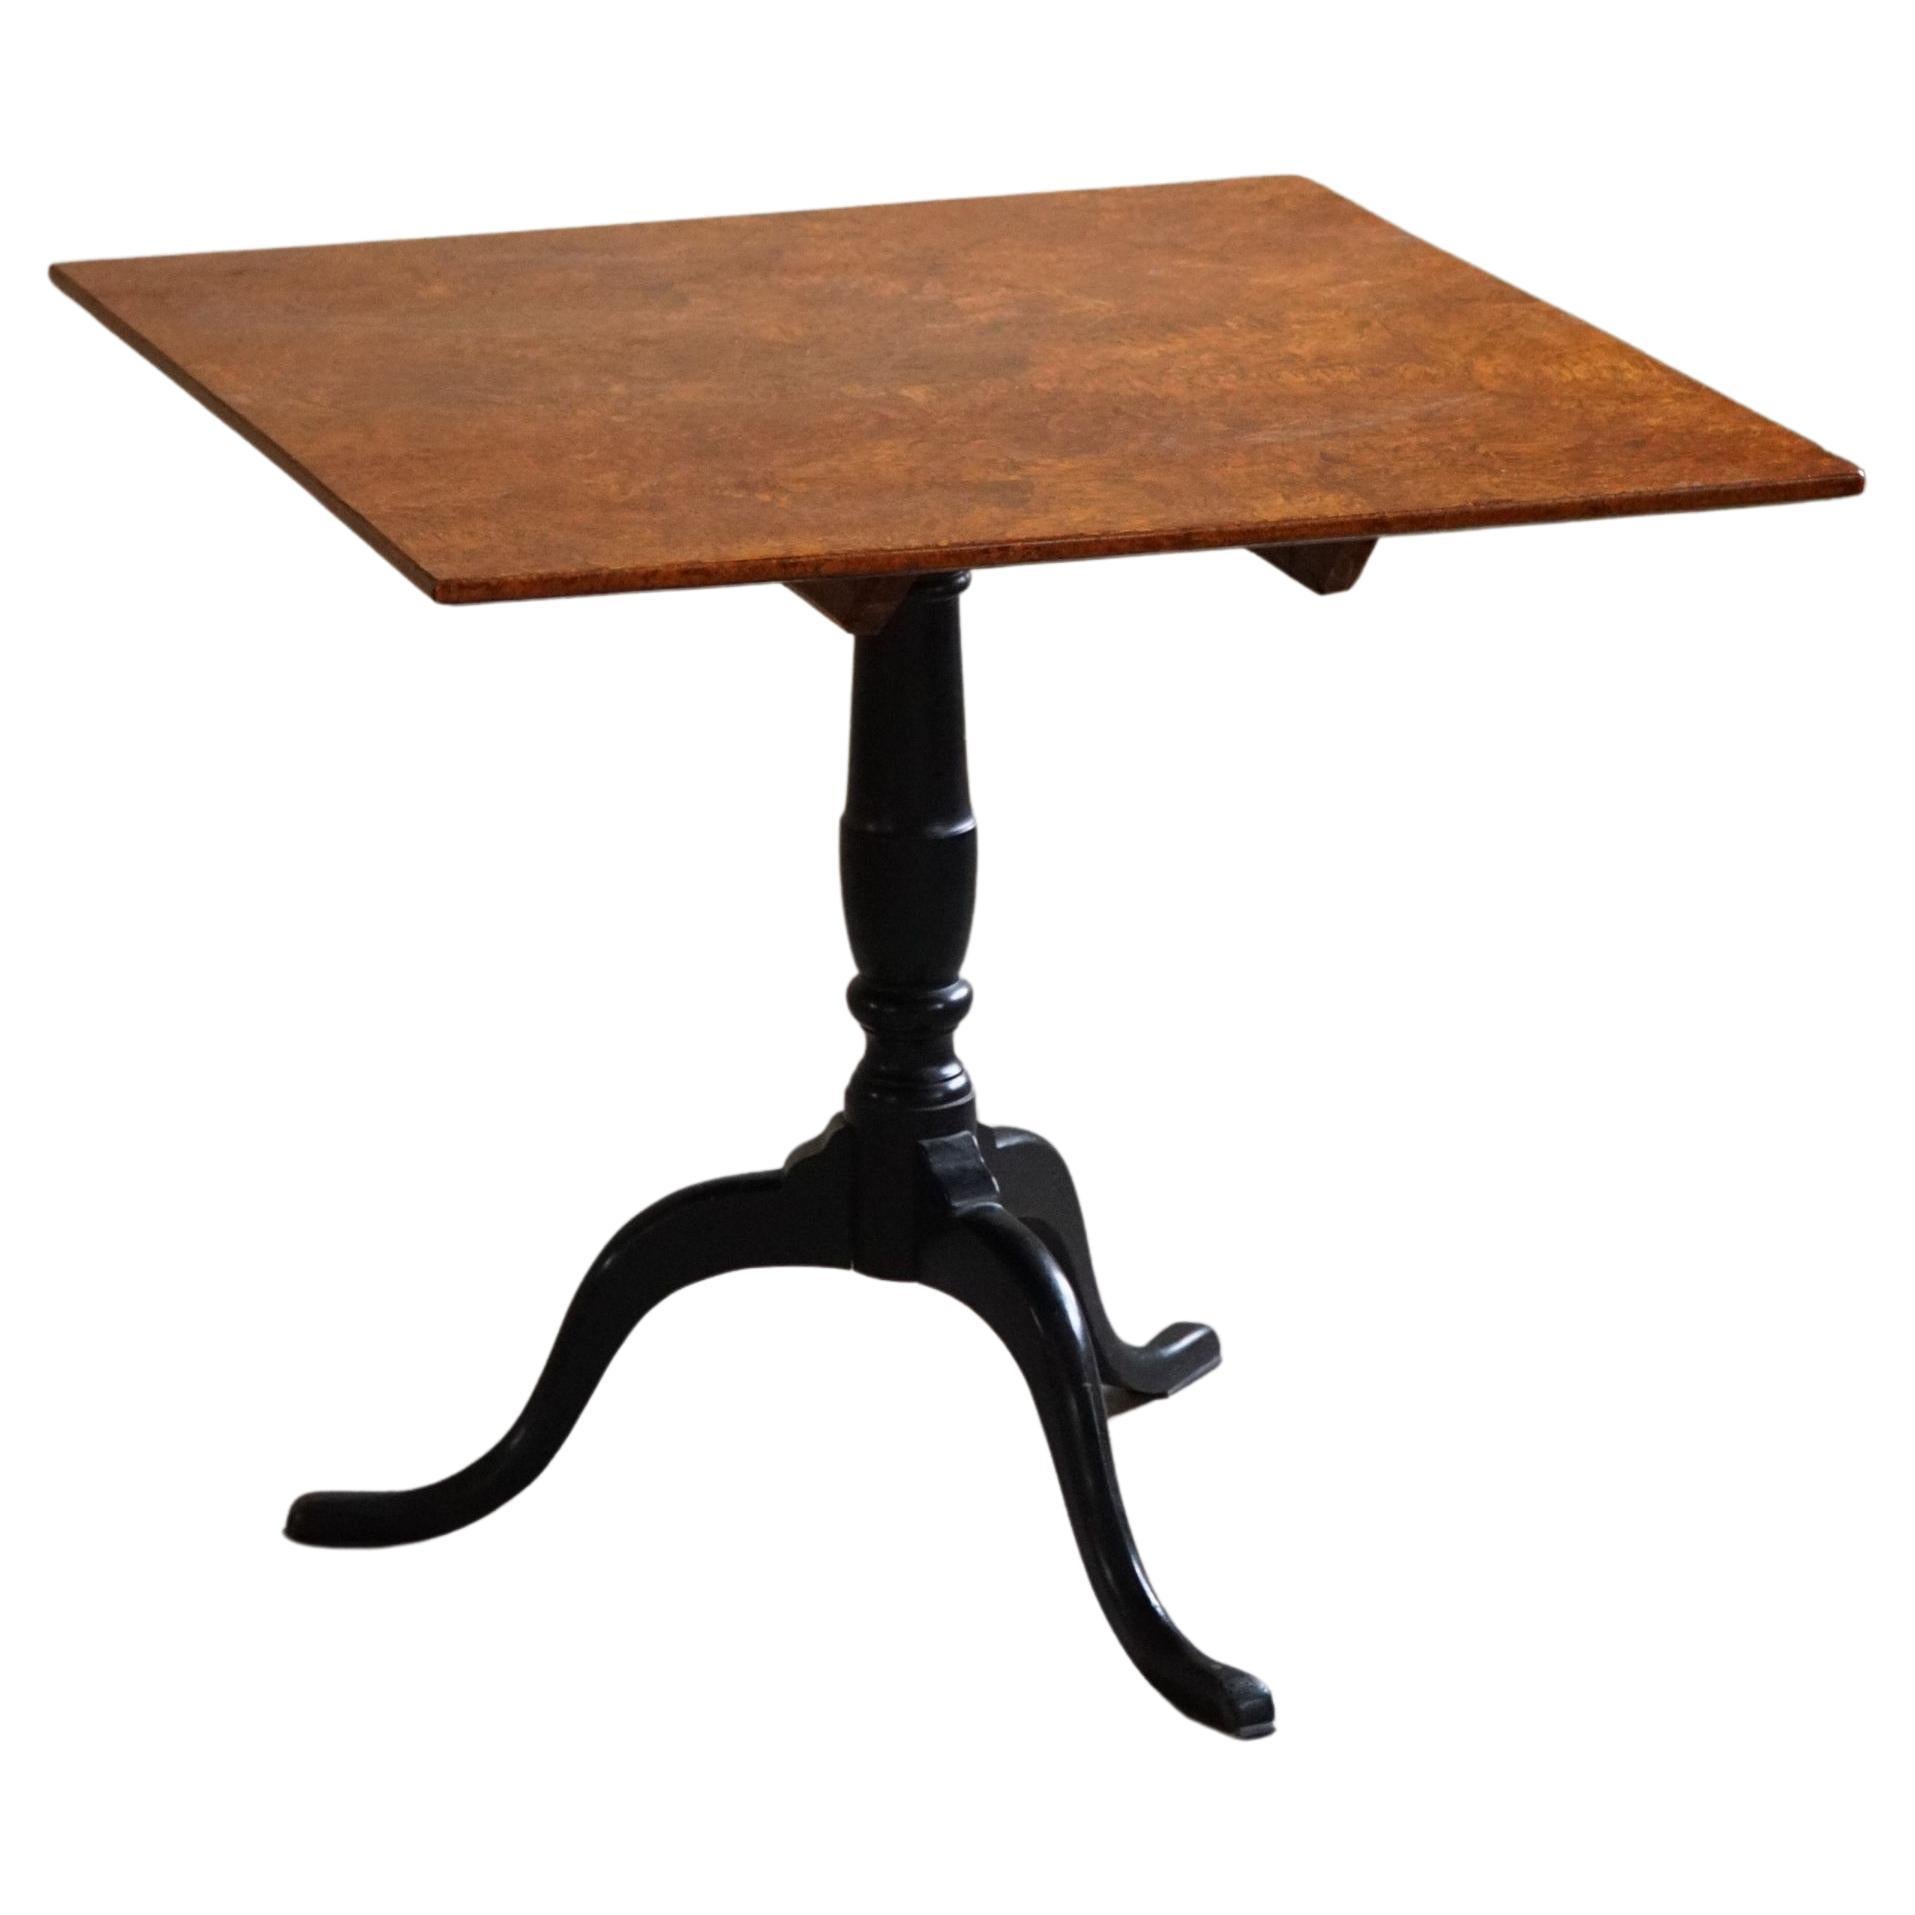 Handcrafted Square Antique Drop Leaf Table in Burl Wood, Swedish, 19th Century